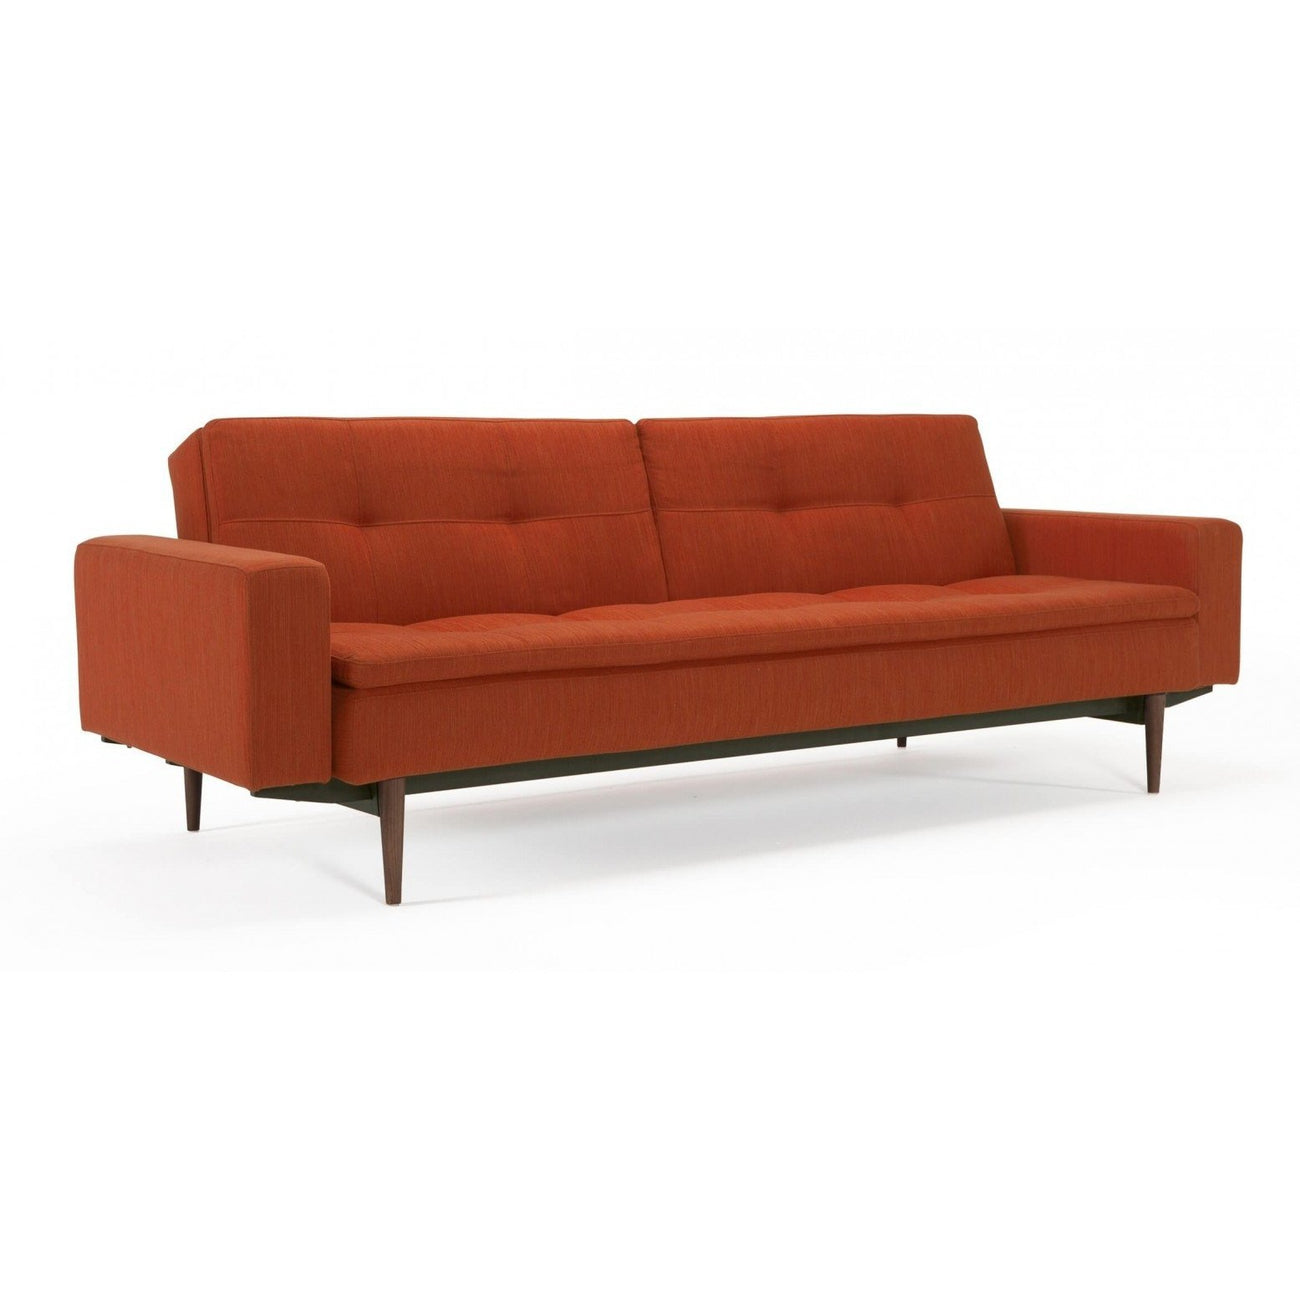 Dublexo Deluxe Sofa W/Arms,DARK WOOD-Innovation Living-INNO-94-741050020506-10-3-SofasElegance Paprika-4-France and Son